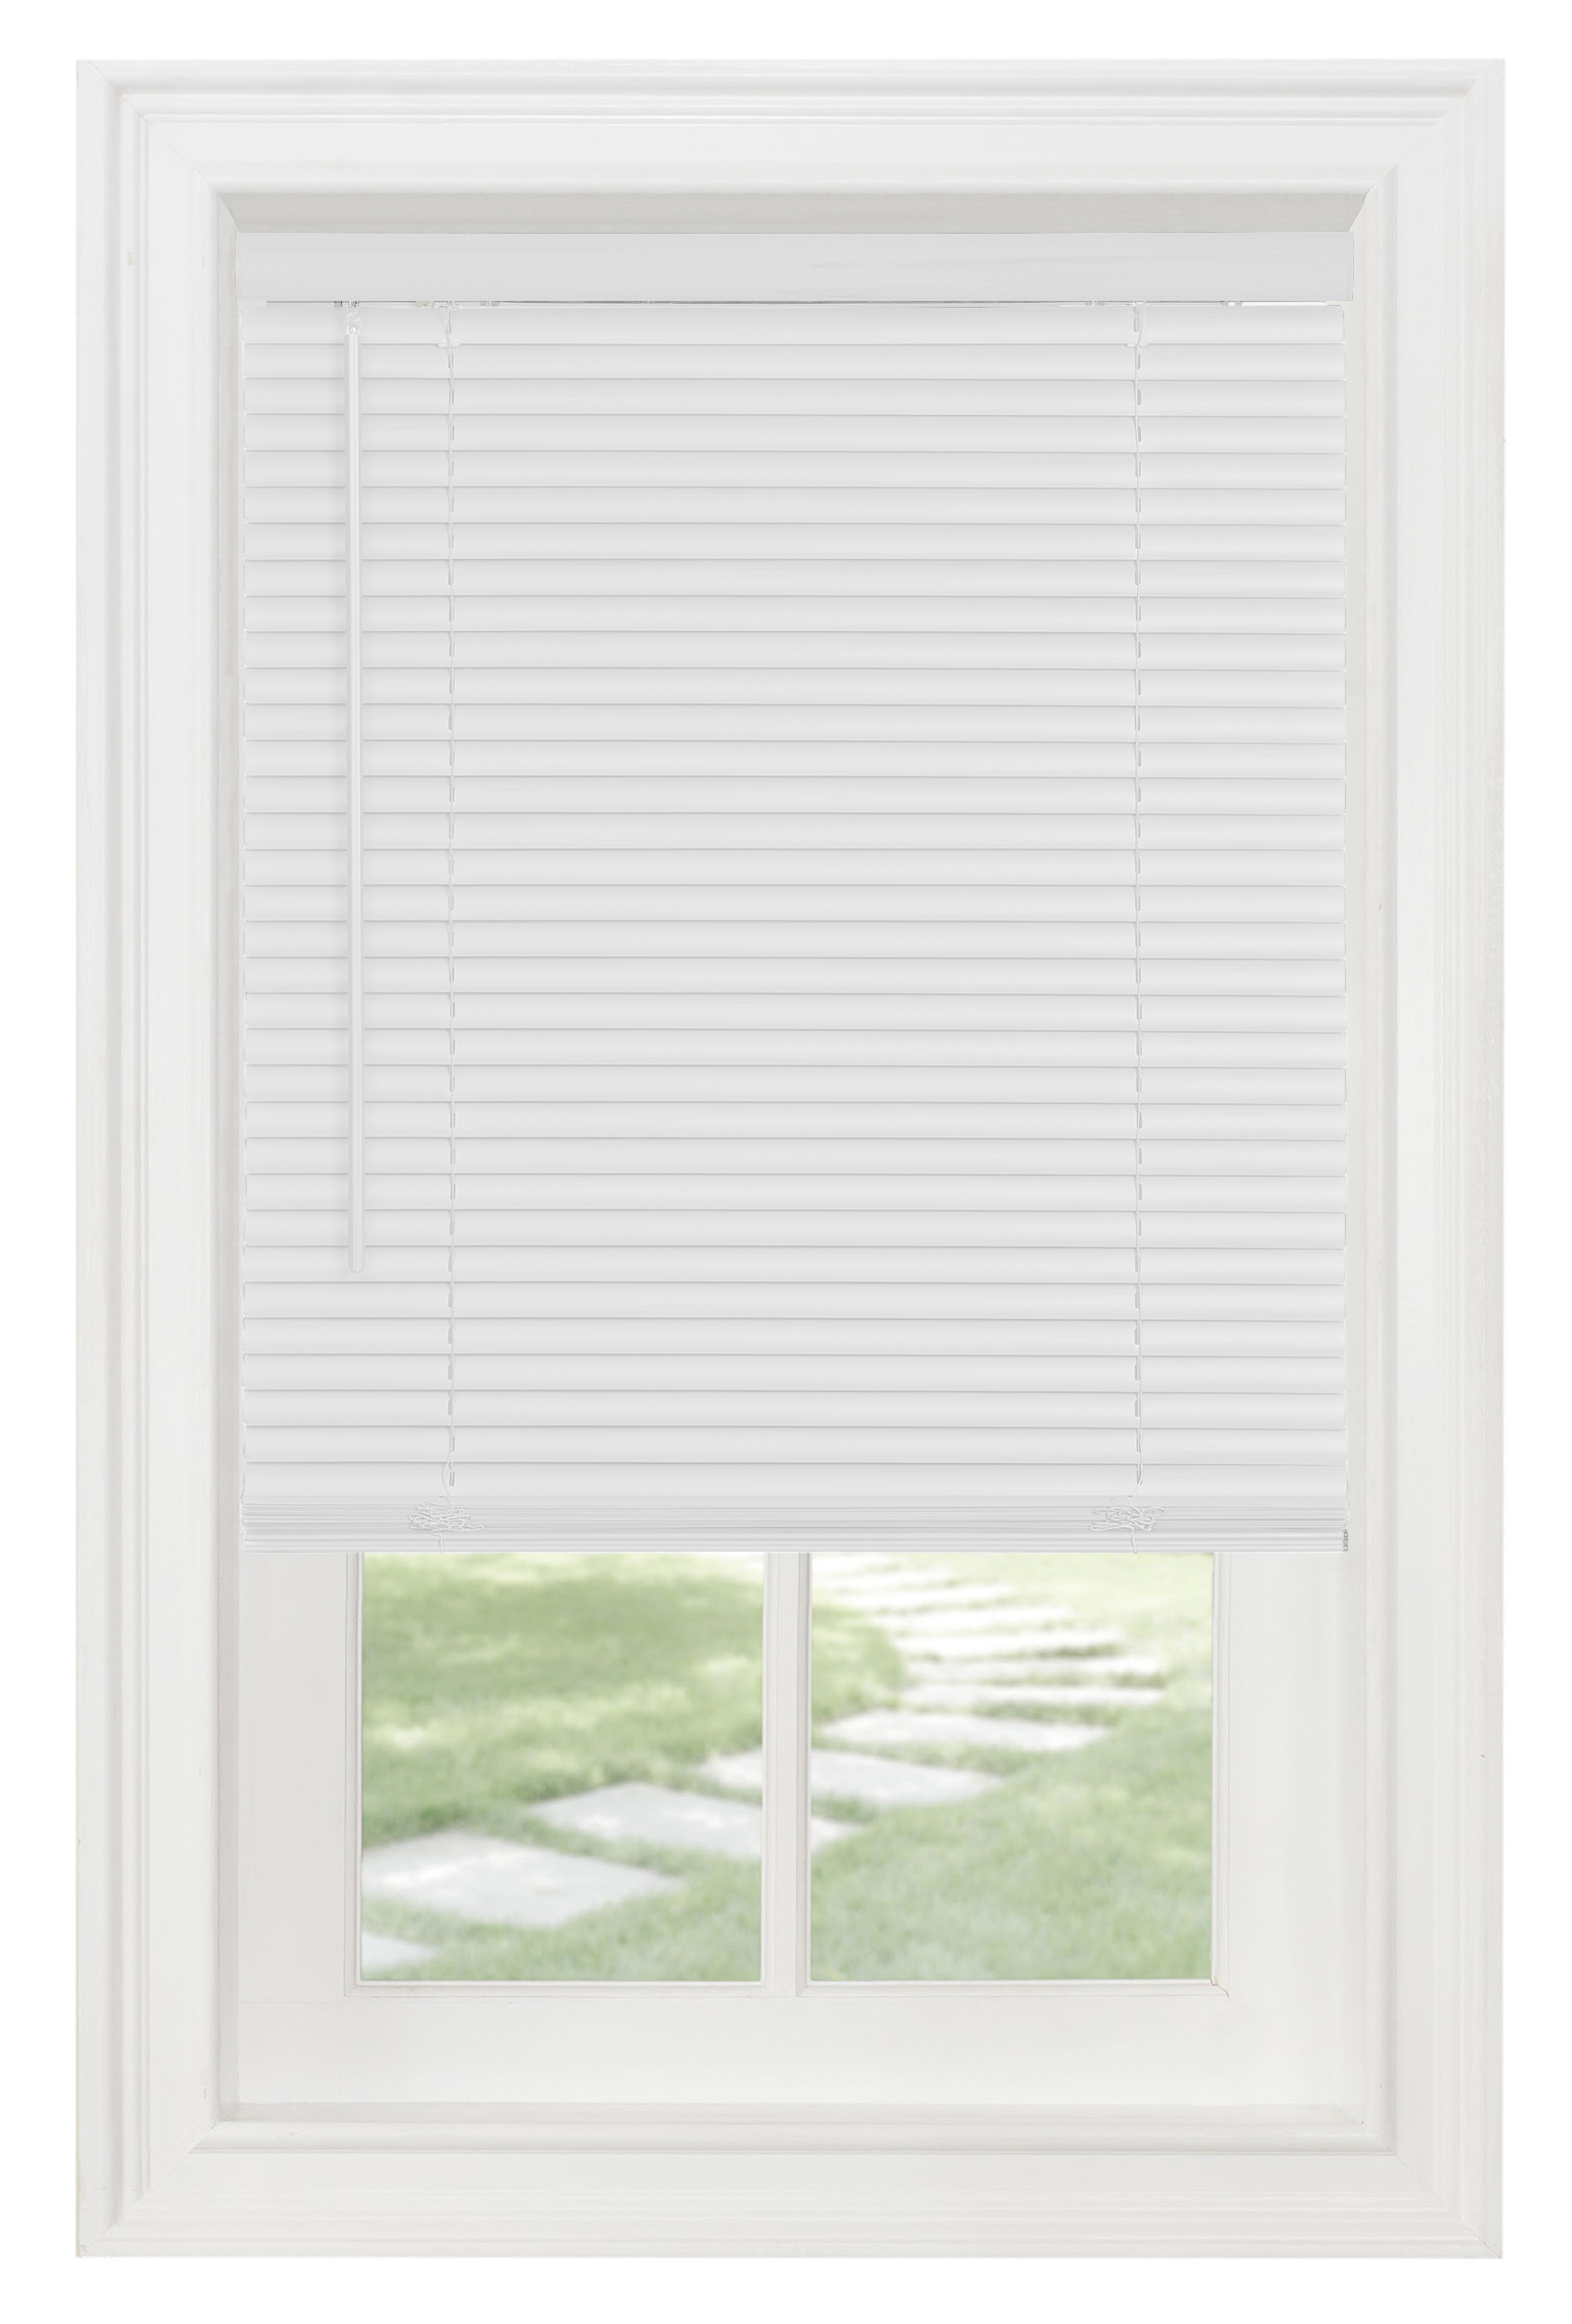 White, 24 x 72 Inch Acholo Blackout Roller Shades Cordless Window Blinds and Room Darkening Shades for Home /& Windows